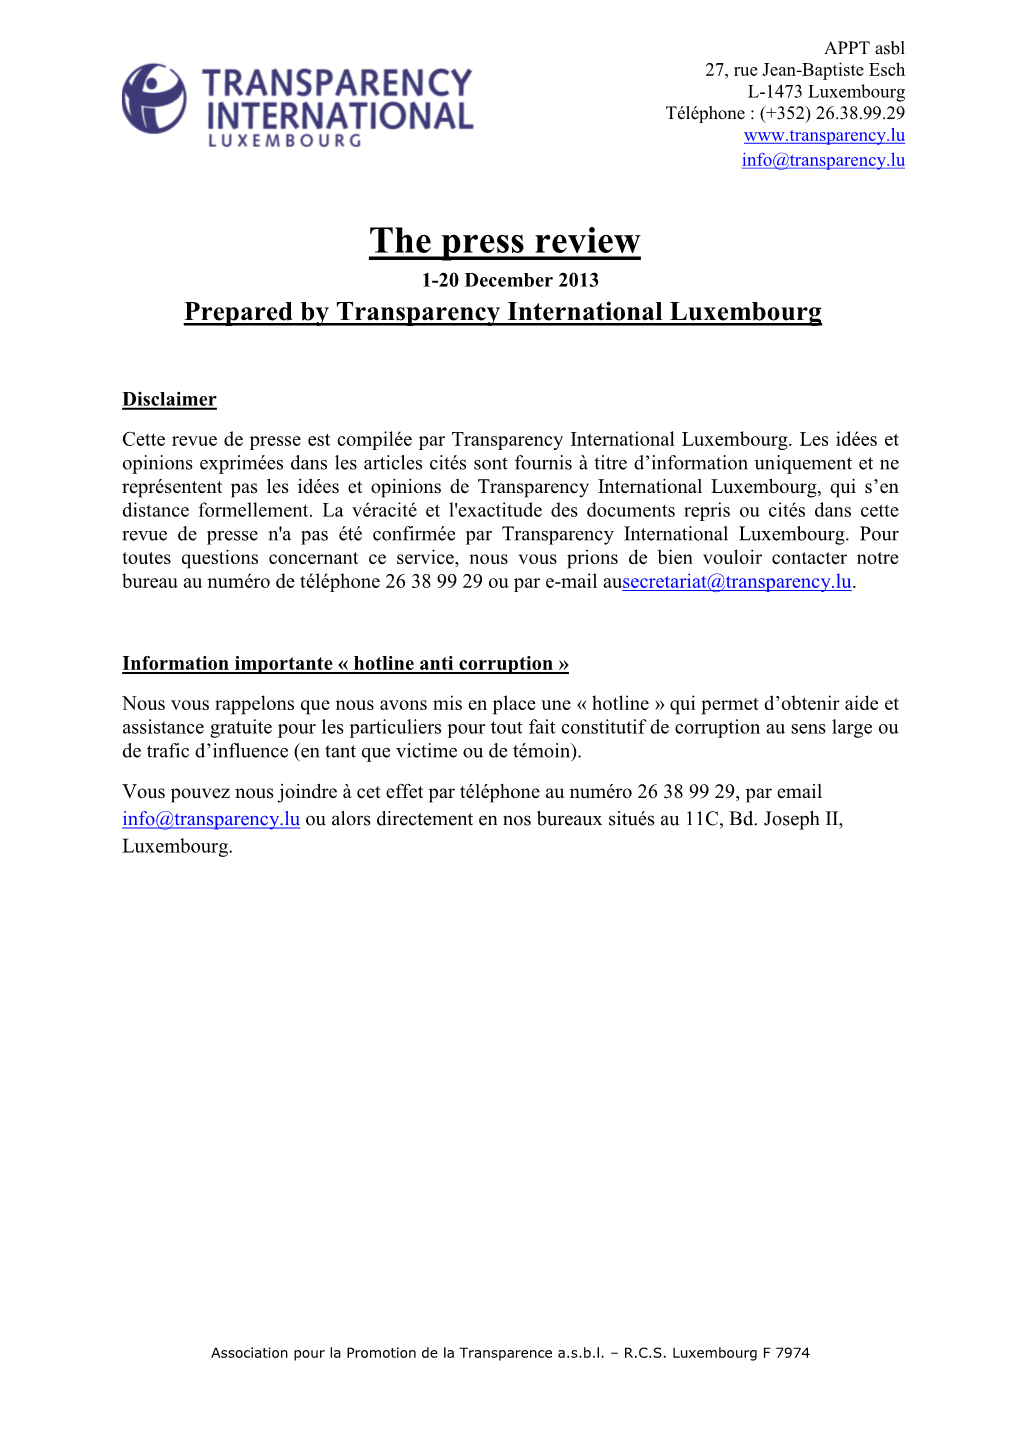 The Press Review 1-20 December 2013 Prepared by Transparency International Luxembourg